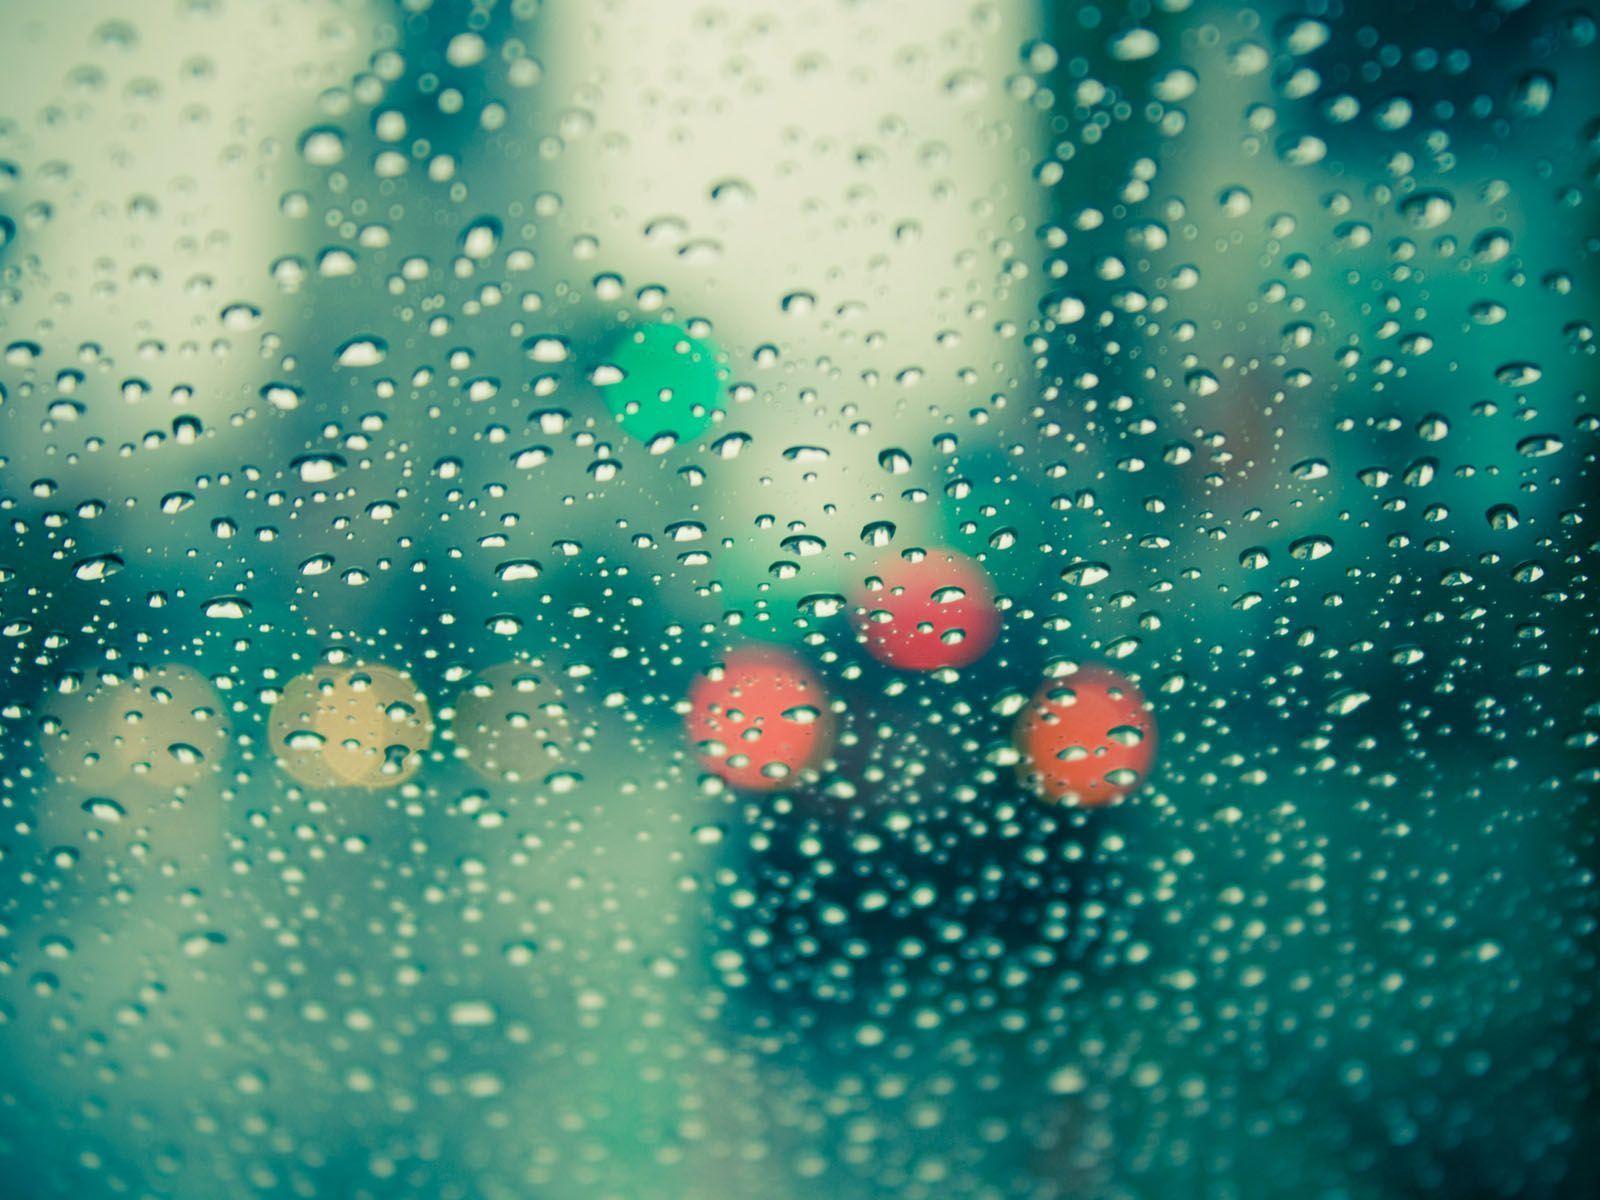 Raindrops On Window Wallpaper Image & Picture